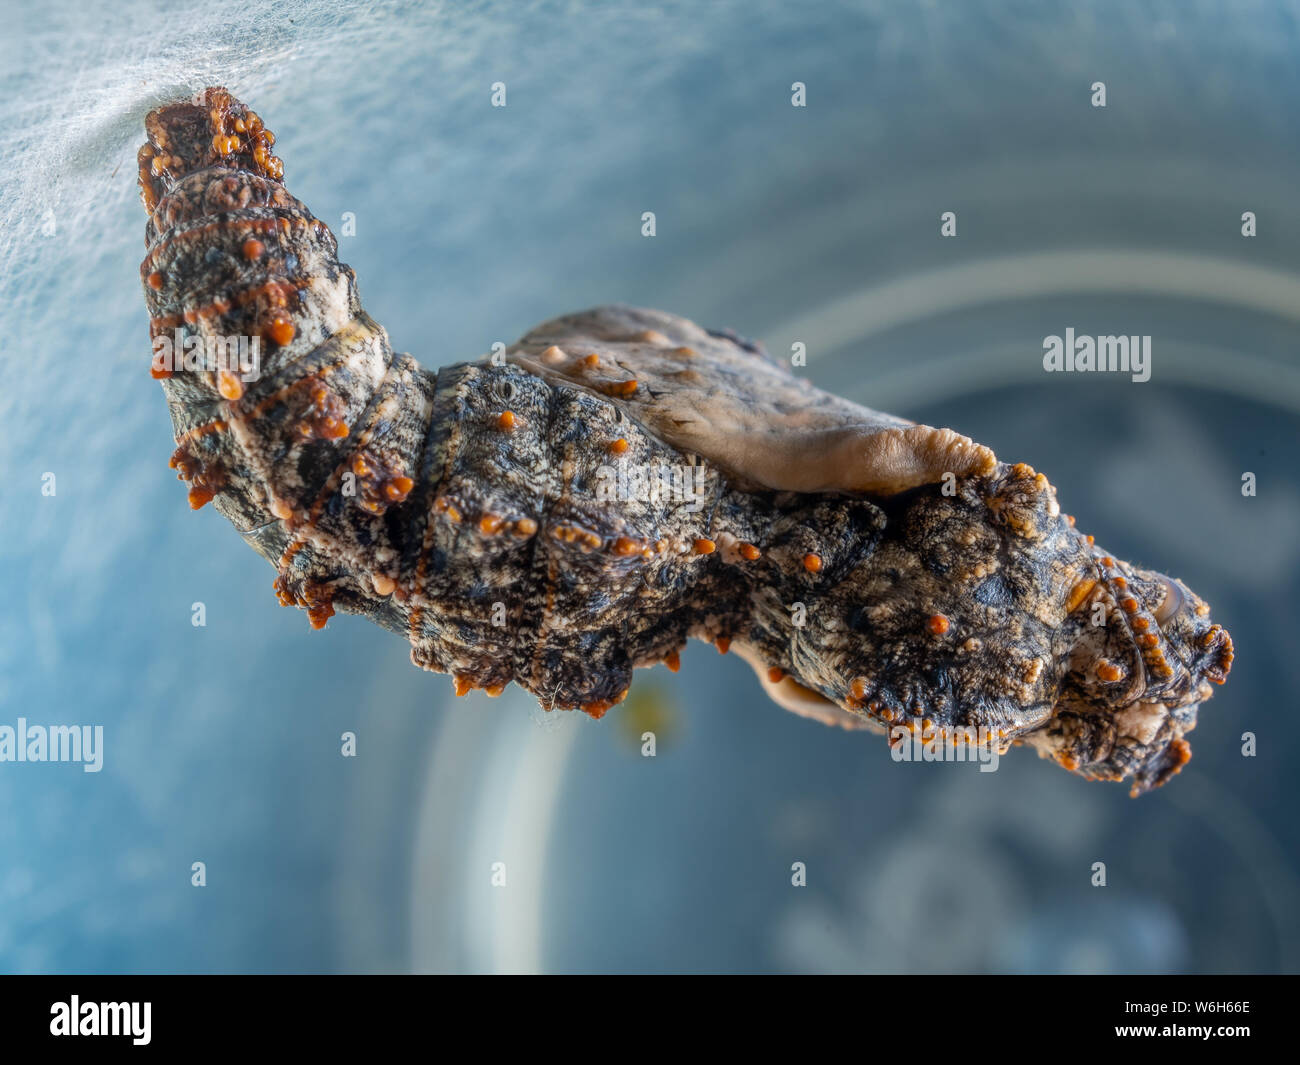 Extreme macro of a butterfly chrysalis inside a plastic cup, species from a garden in Brazil Stock Photo